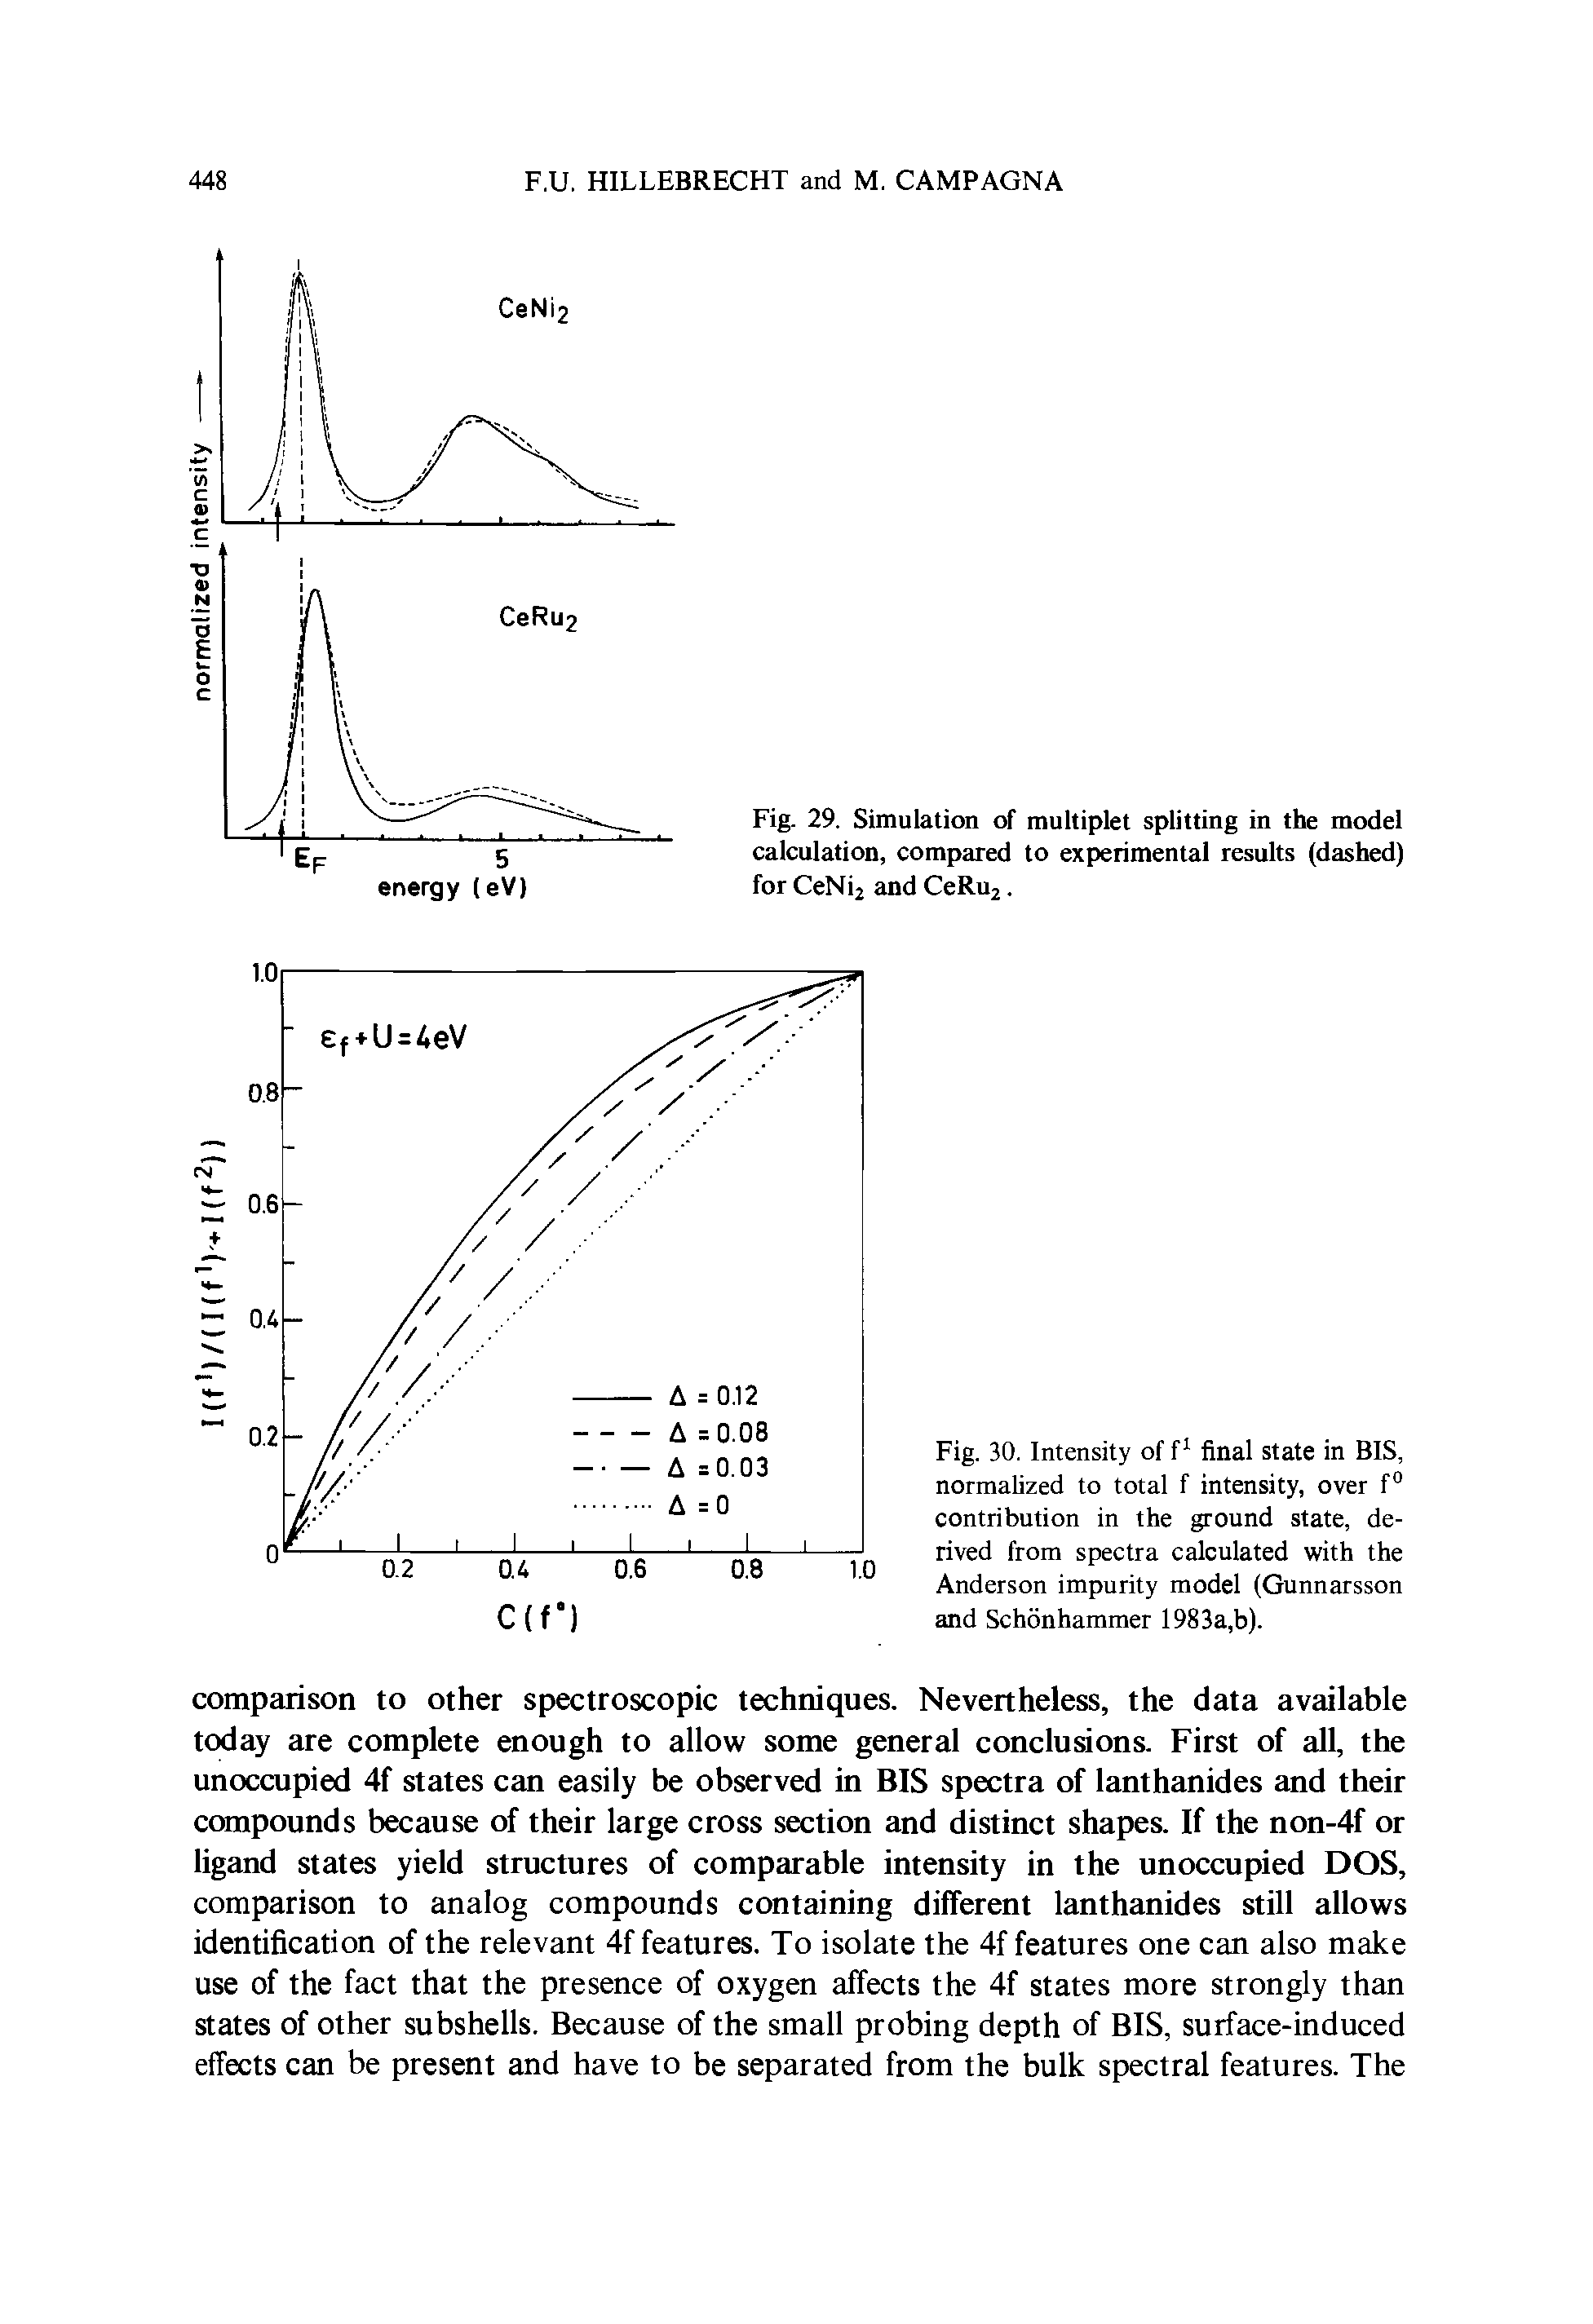 Fig. 30. Intensity of f final state in BIS, normalized to total f intensity, over f° contribution in the ground state, derived from spectra calculated with the Anderson impurity model (Gunnarsson and Schonhammer 1983a,b).